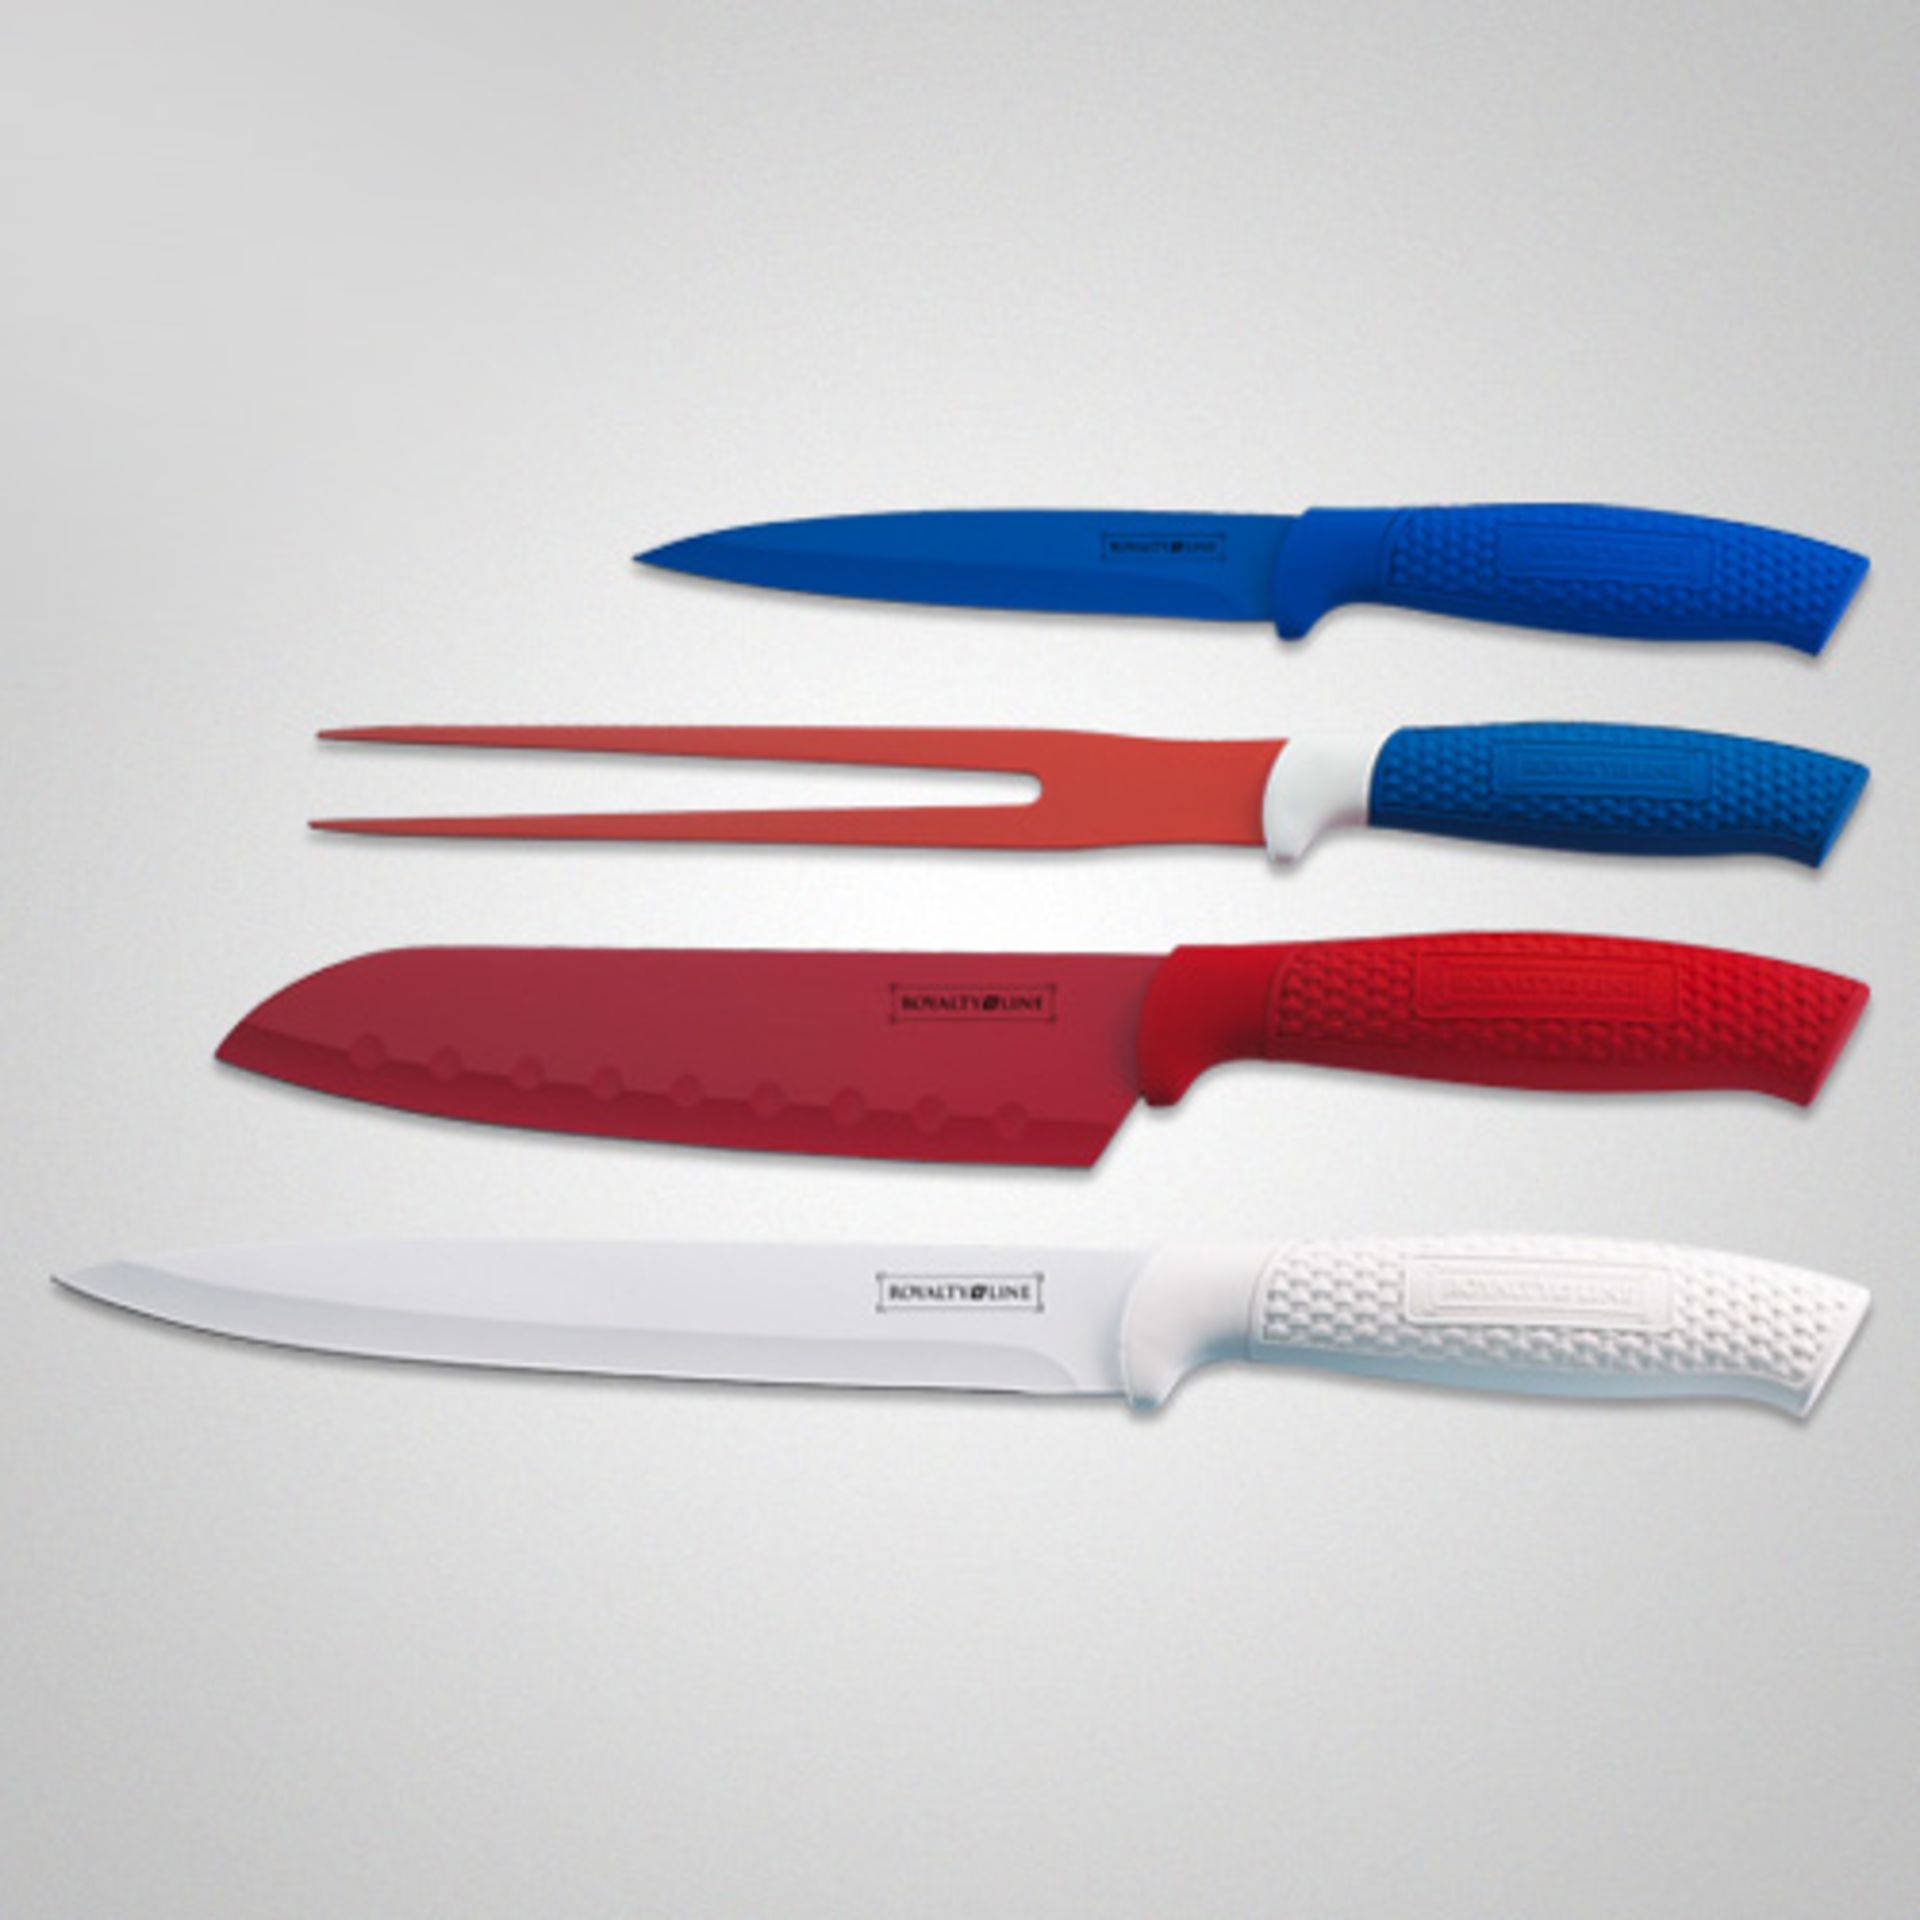 V Brand New 4 Piece Carving Knife Set In Display Box With Non-Stick Coating X 2 YOUR BID PRICE TO BE